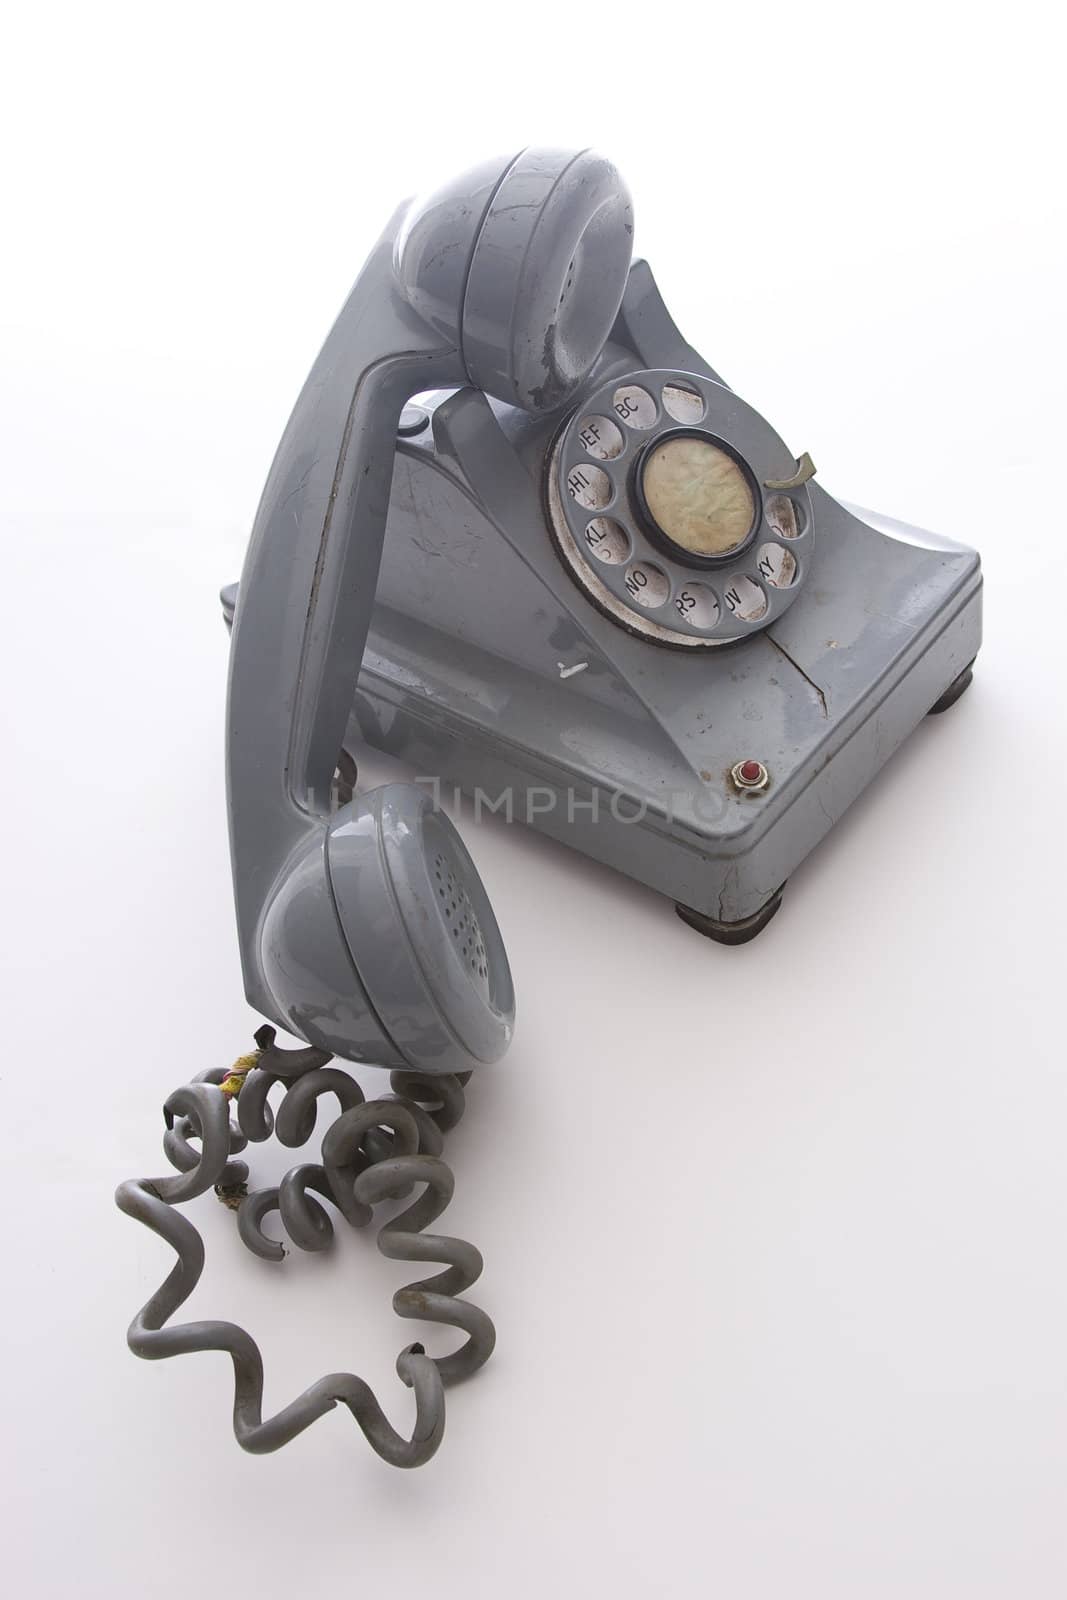 dirty vintage gray unhooked rotary phone with crack casing and expose wired